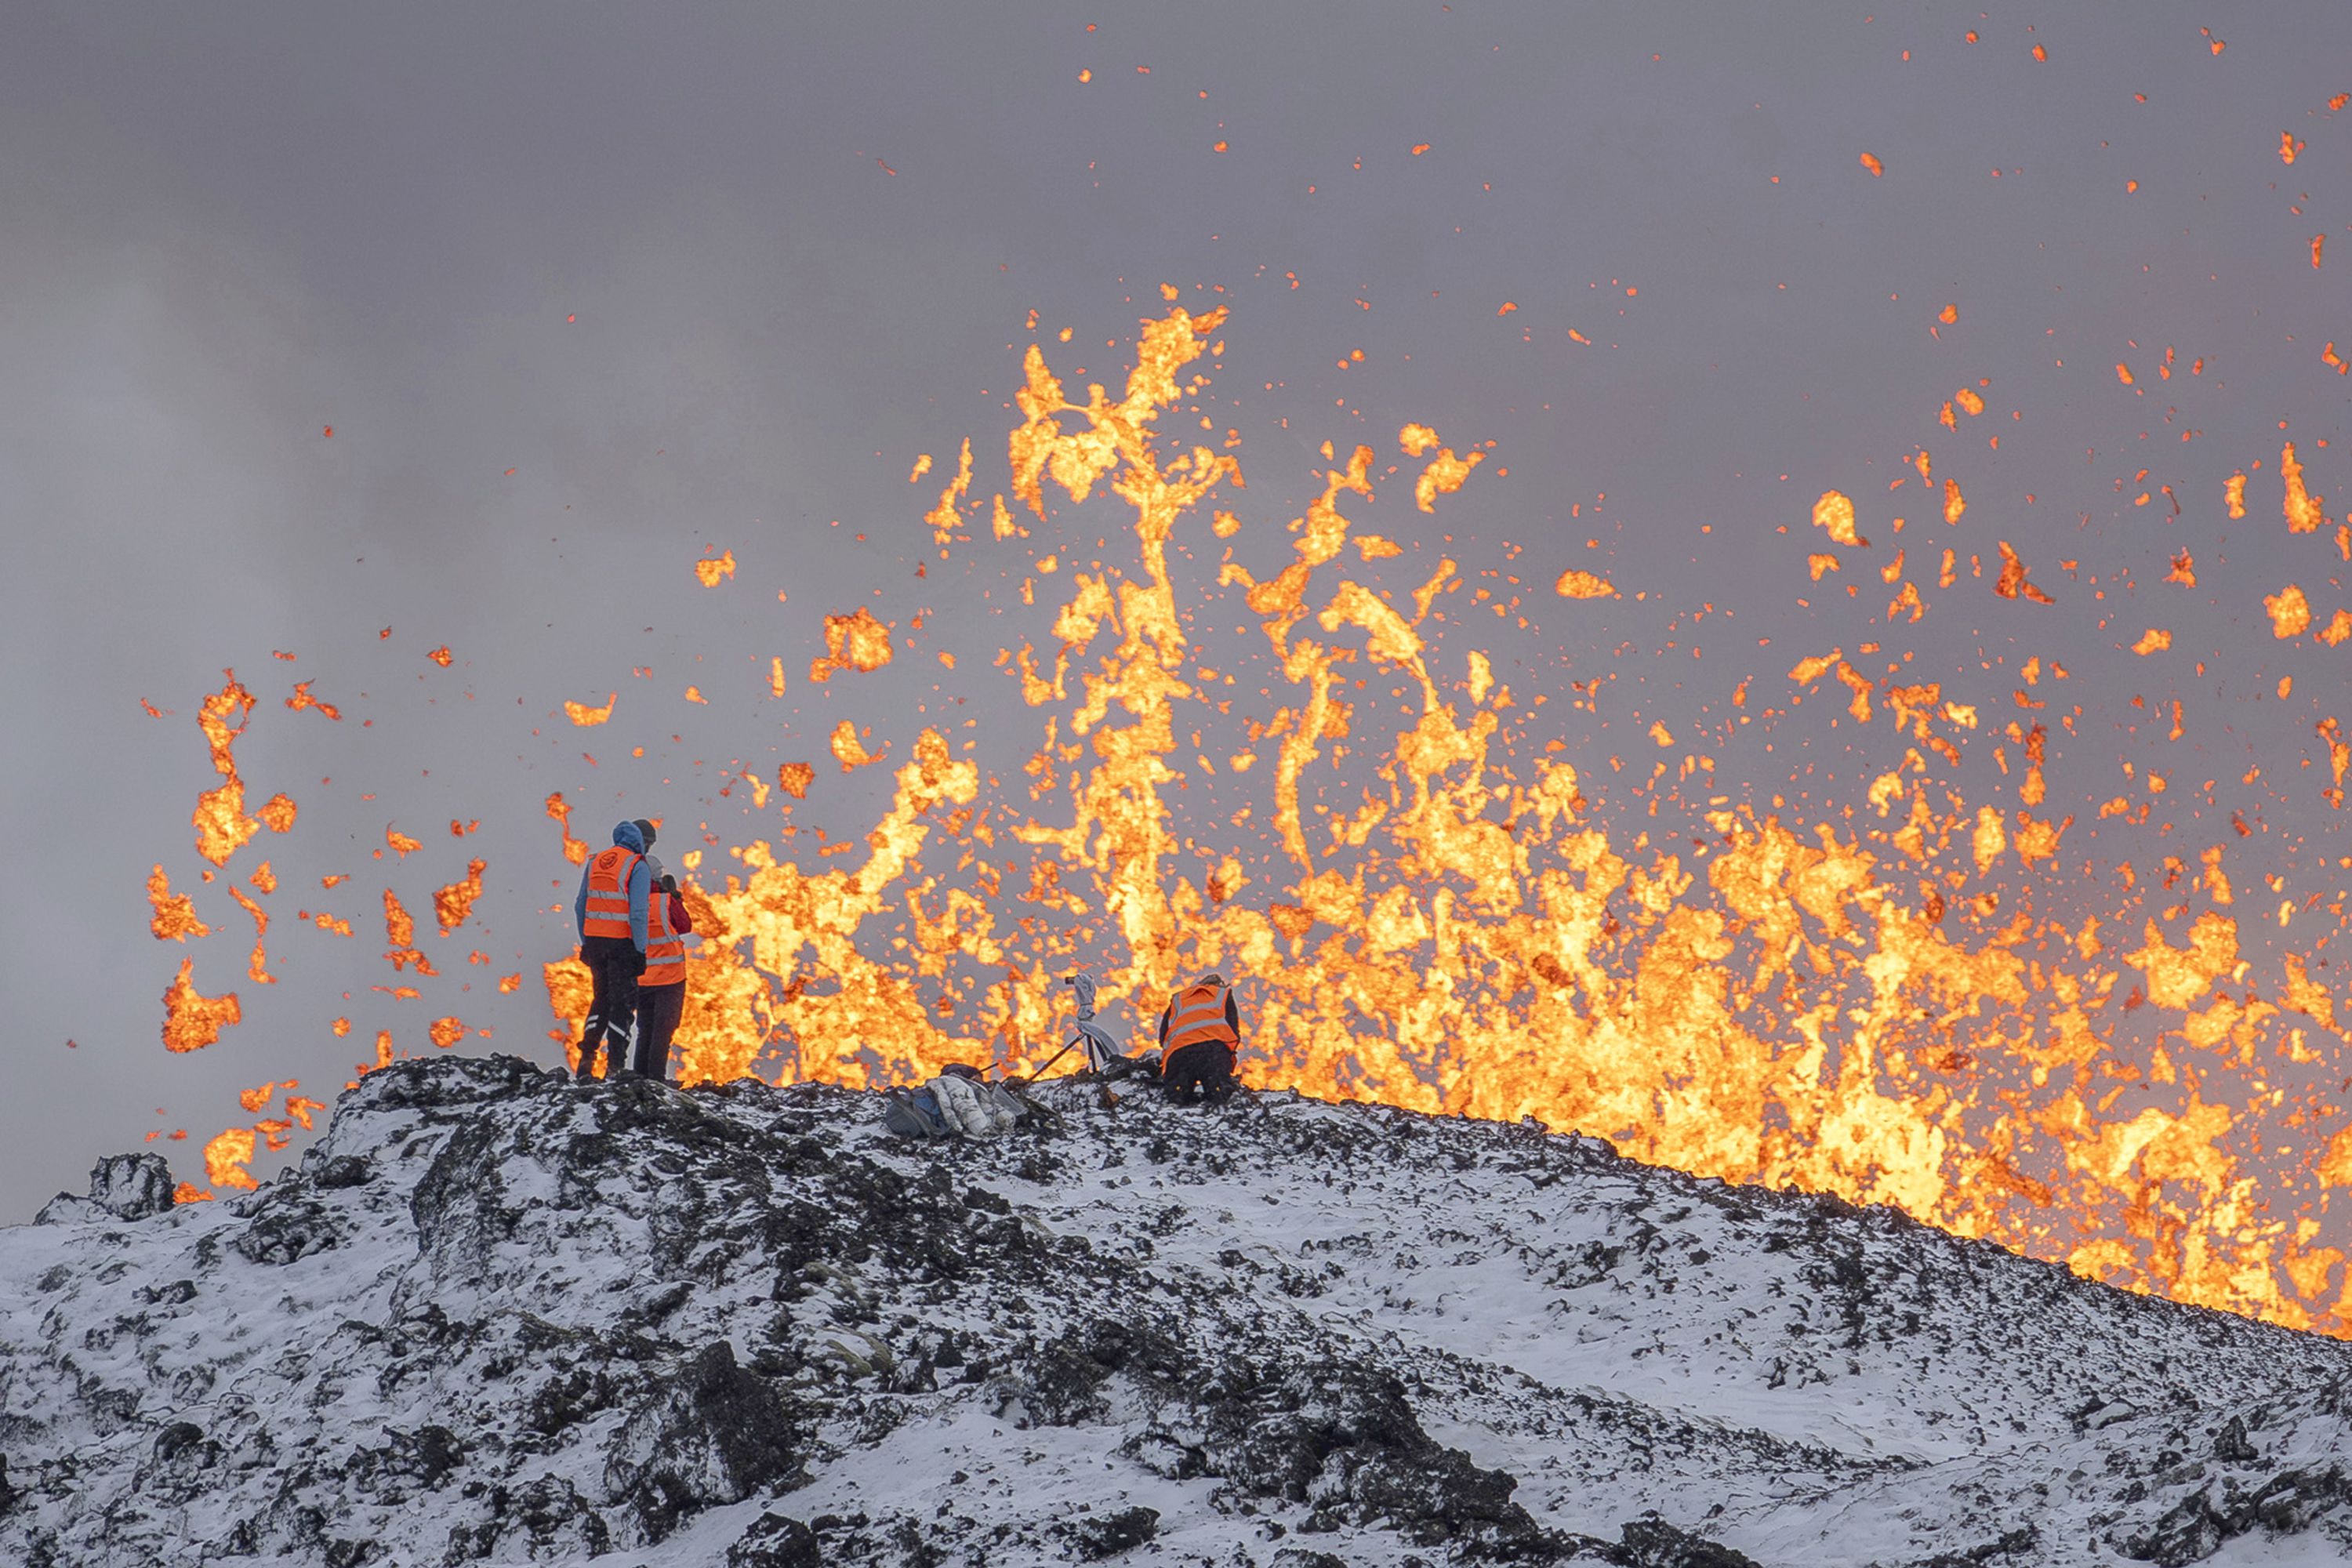 Scientists from the University of Iceland take measurements and samples while standing on the ridge of the eruptive fissure of an active volcano near Grindavik, Iceland, on Tuesday, December 19.